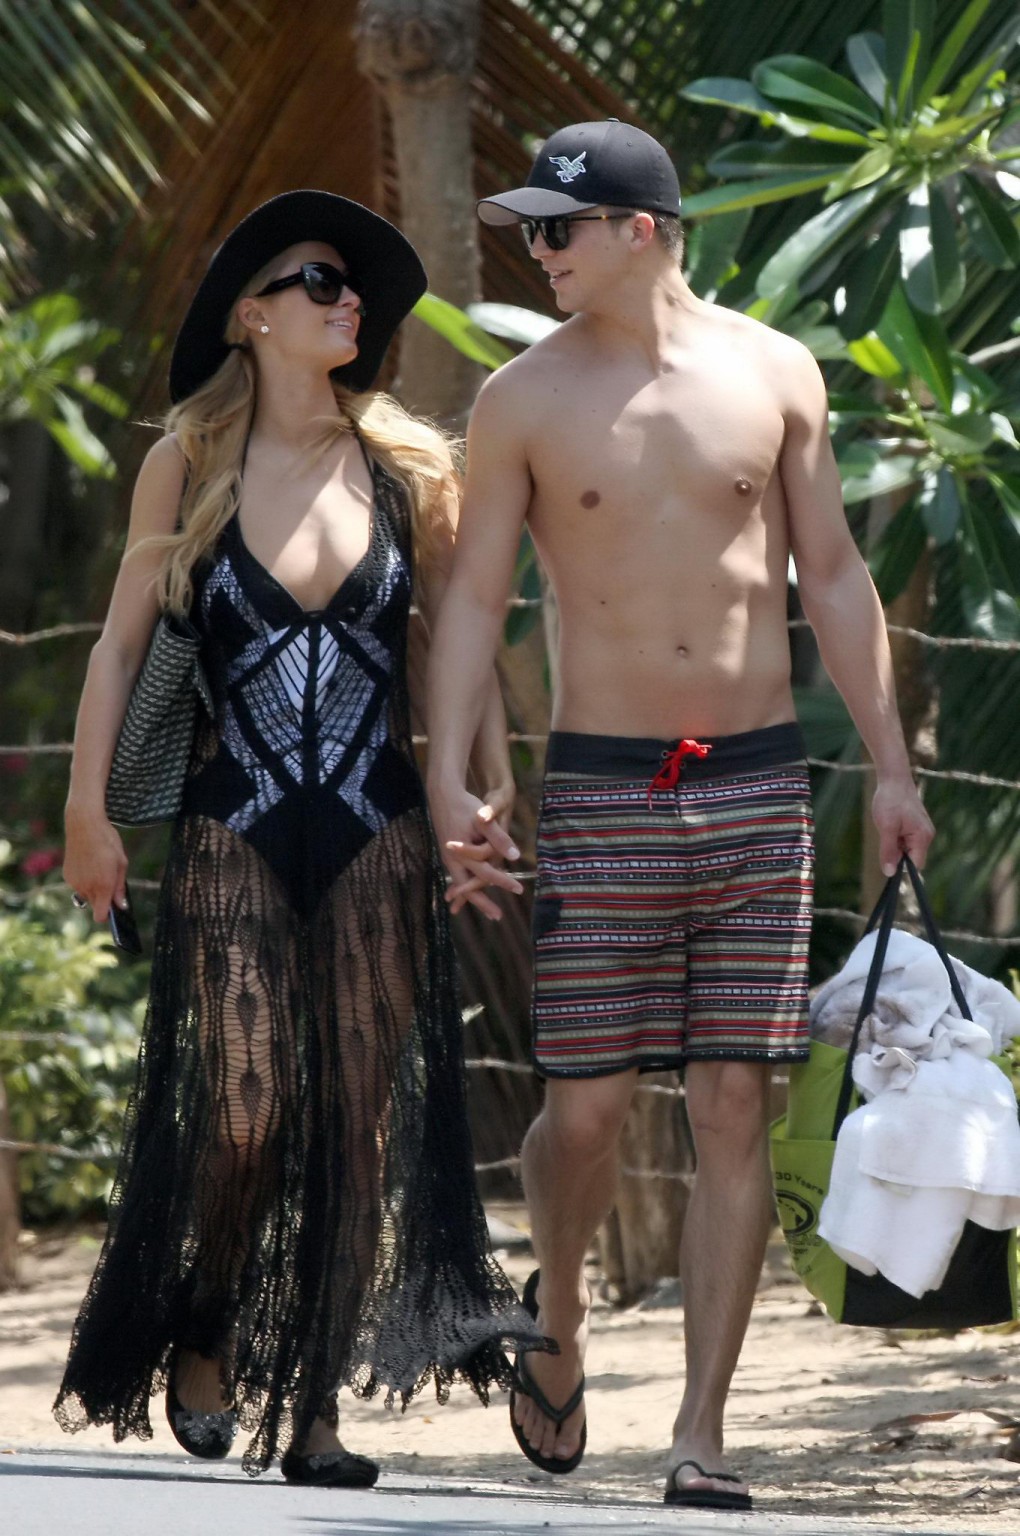 Paris Hilton wearing a swimsuit  a see through lace dress on a beach in Hawaii #75230659